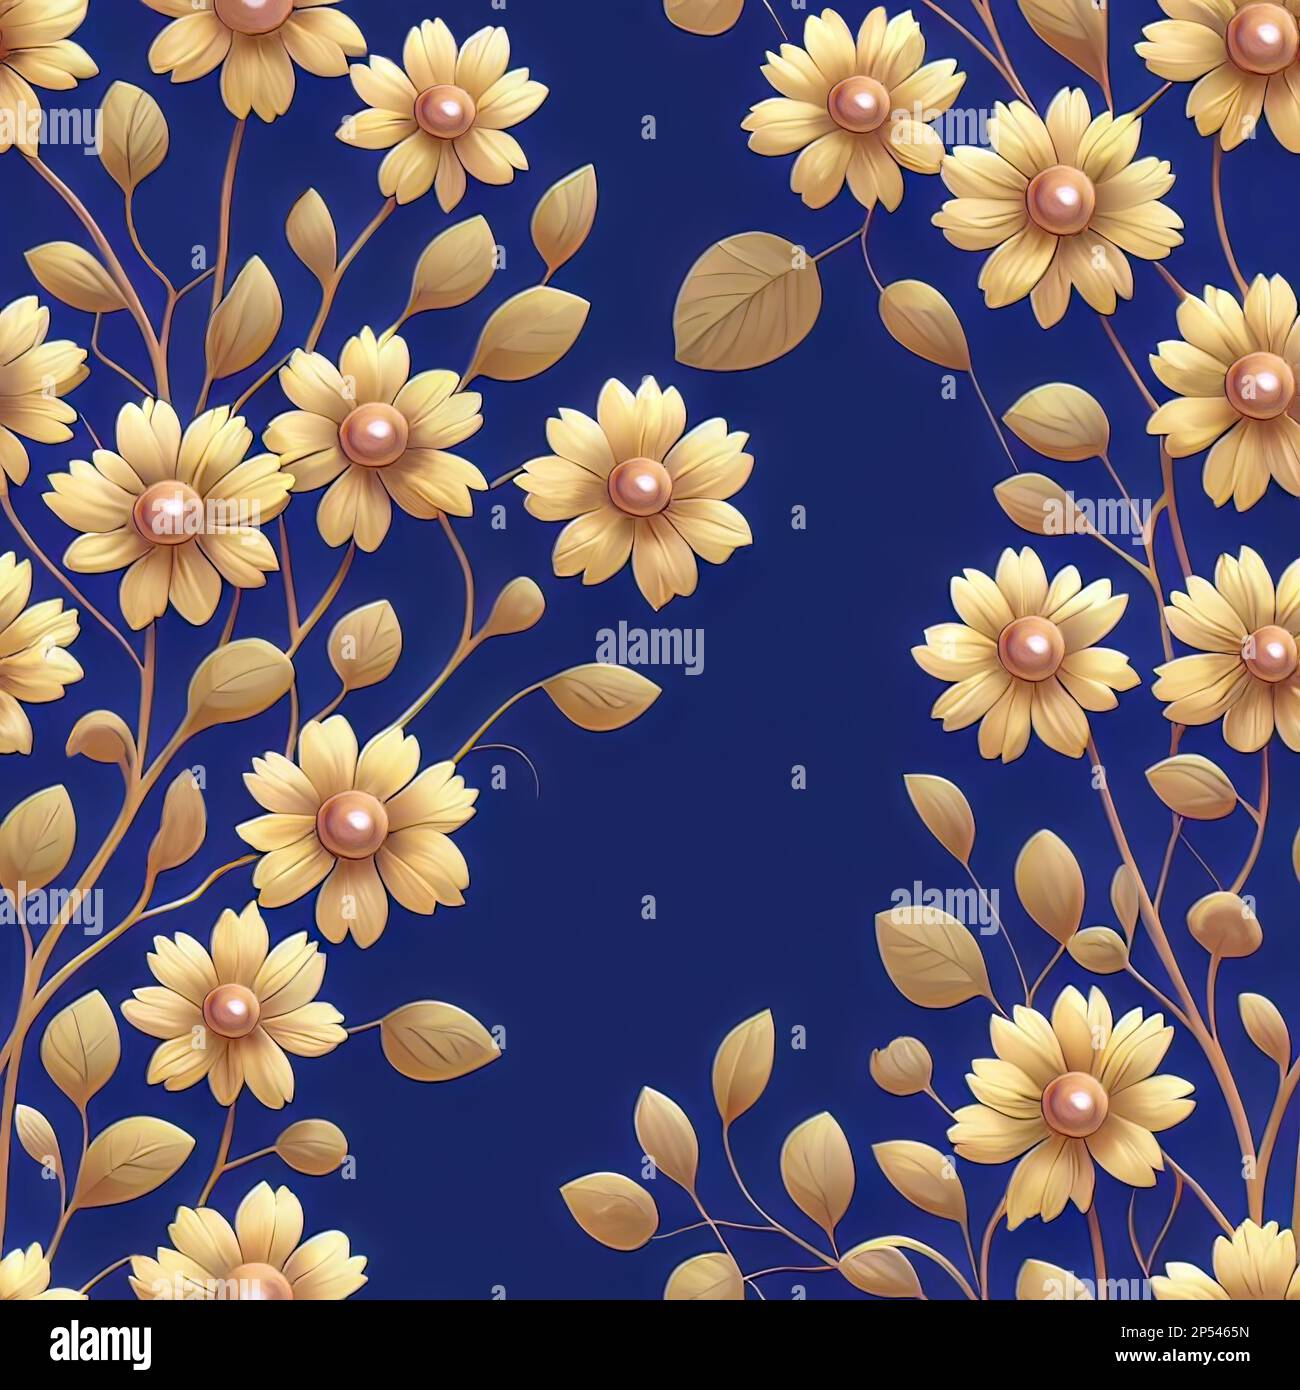 Illustration of beautiful seamless floral pattern with dark blue background Stock Photo